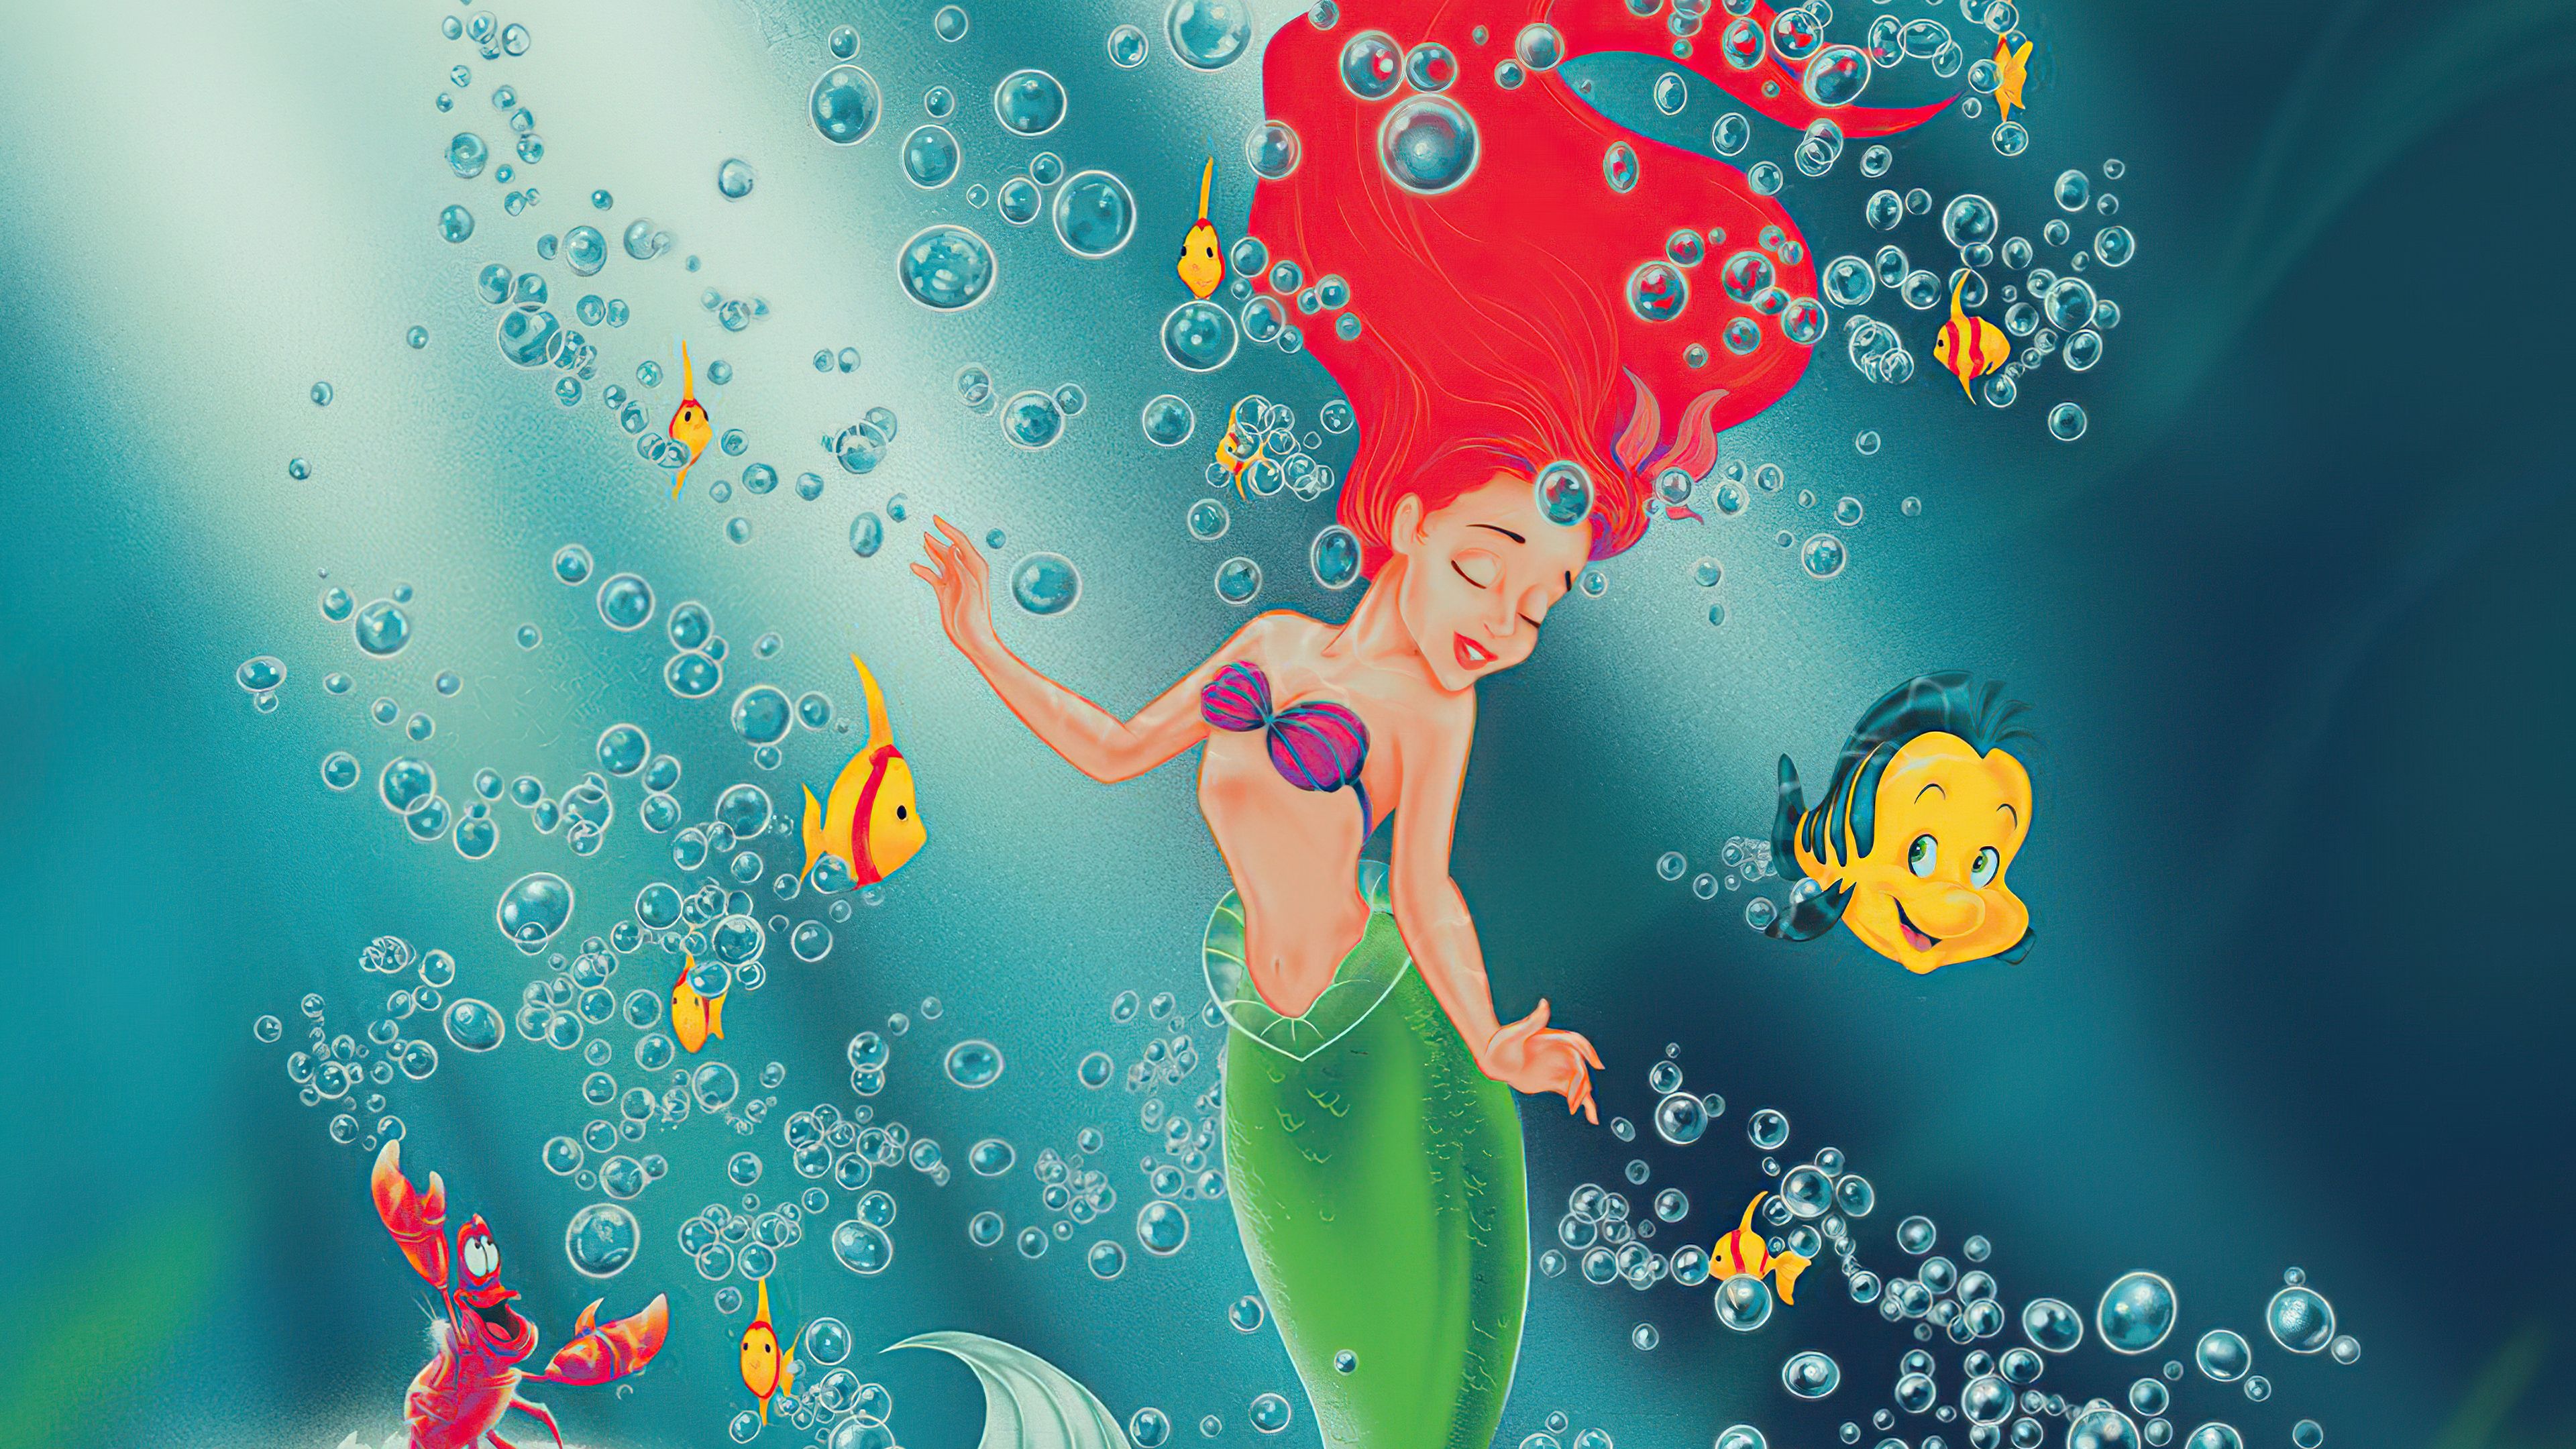 The Little Mermaid Poster 4k iPad Pro Retina Display HD 4k Wallpaper, Image, Background, Photo and Picture